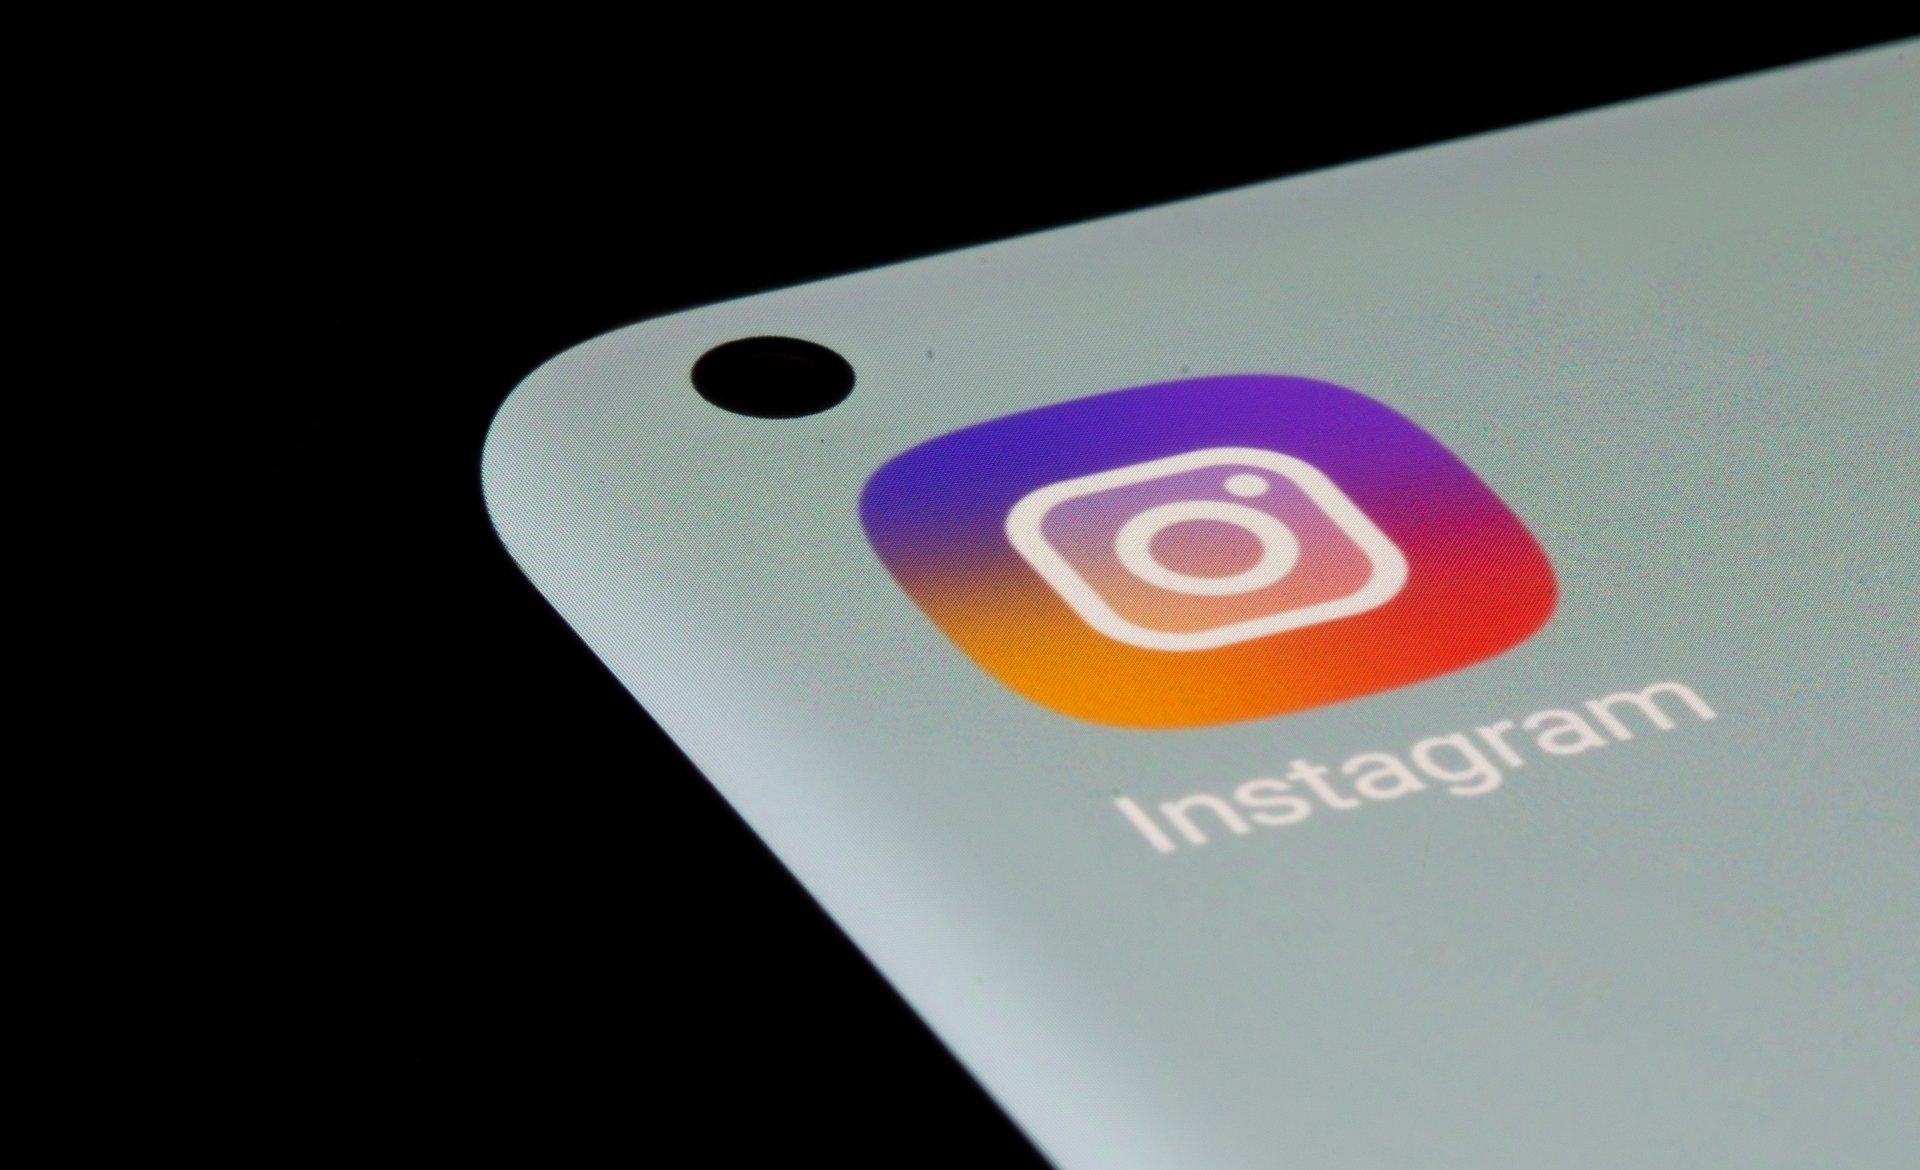 Everybody wants their Instagram profile to look good as possible, and your bio is a part of it. Here is our list of the best trend Instagram bio for girls in 2022.